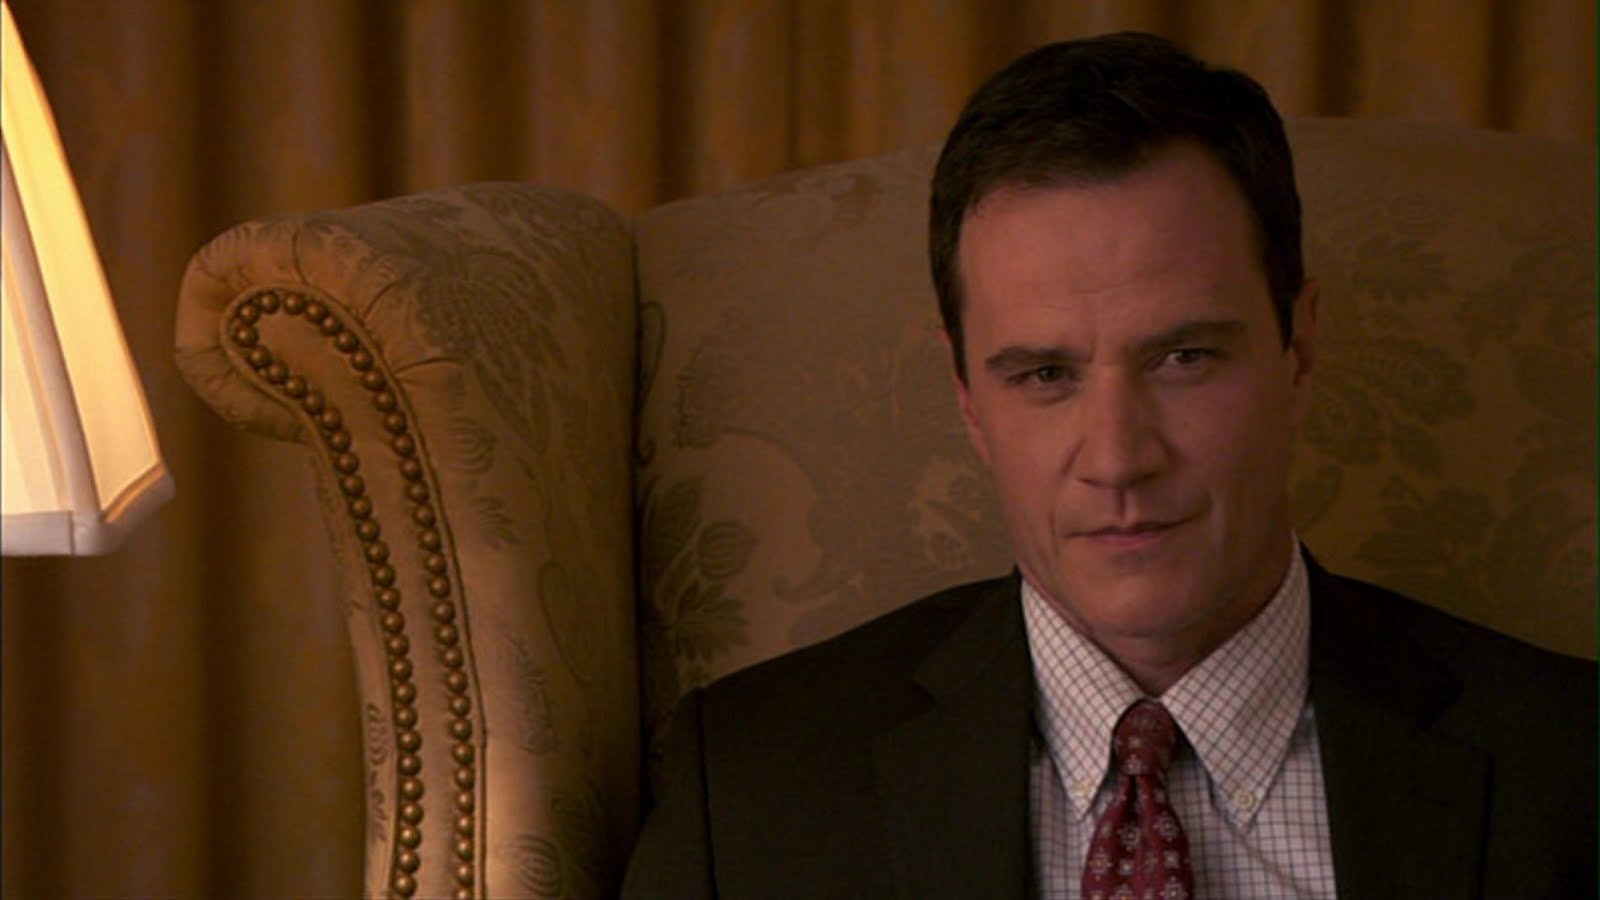 White Collar - Episode 4.02 - Most Wanted - Recap / Review